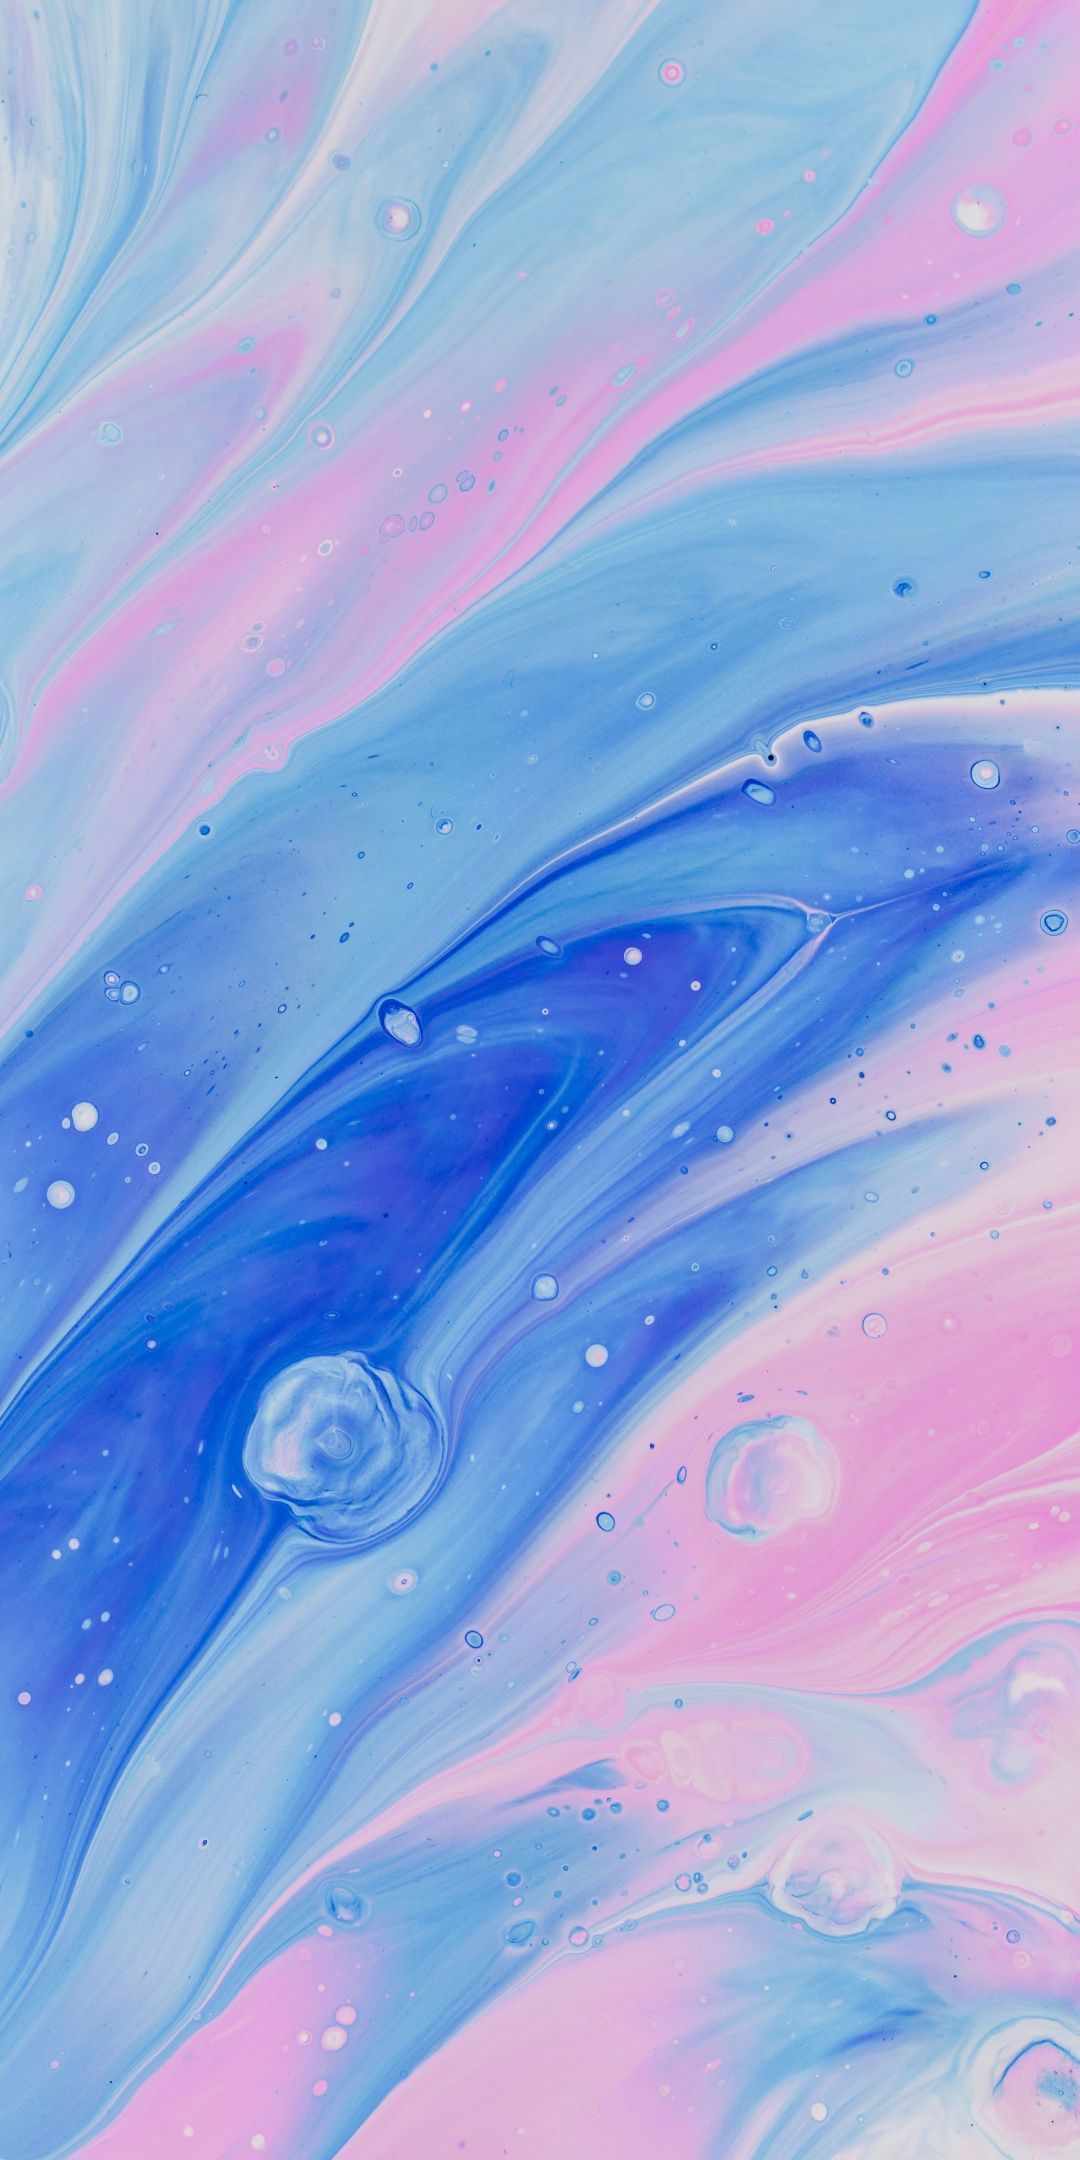 Texture, lines, stains, blue-pink, 1080x2160 wallpaper - Texture, lines, stains, blue-pink, 1080x2160 wallpaper -   17 beauty Wallpaper texture ideas